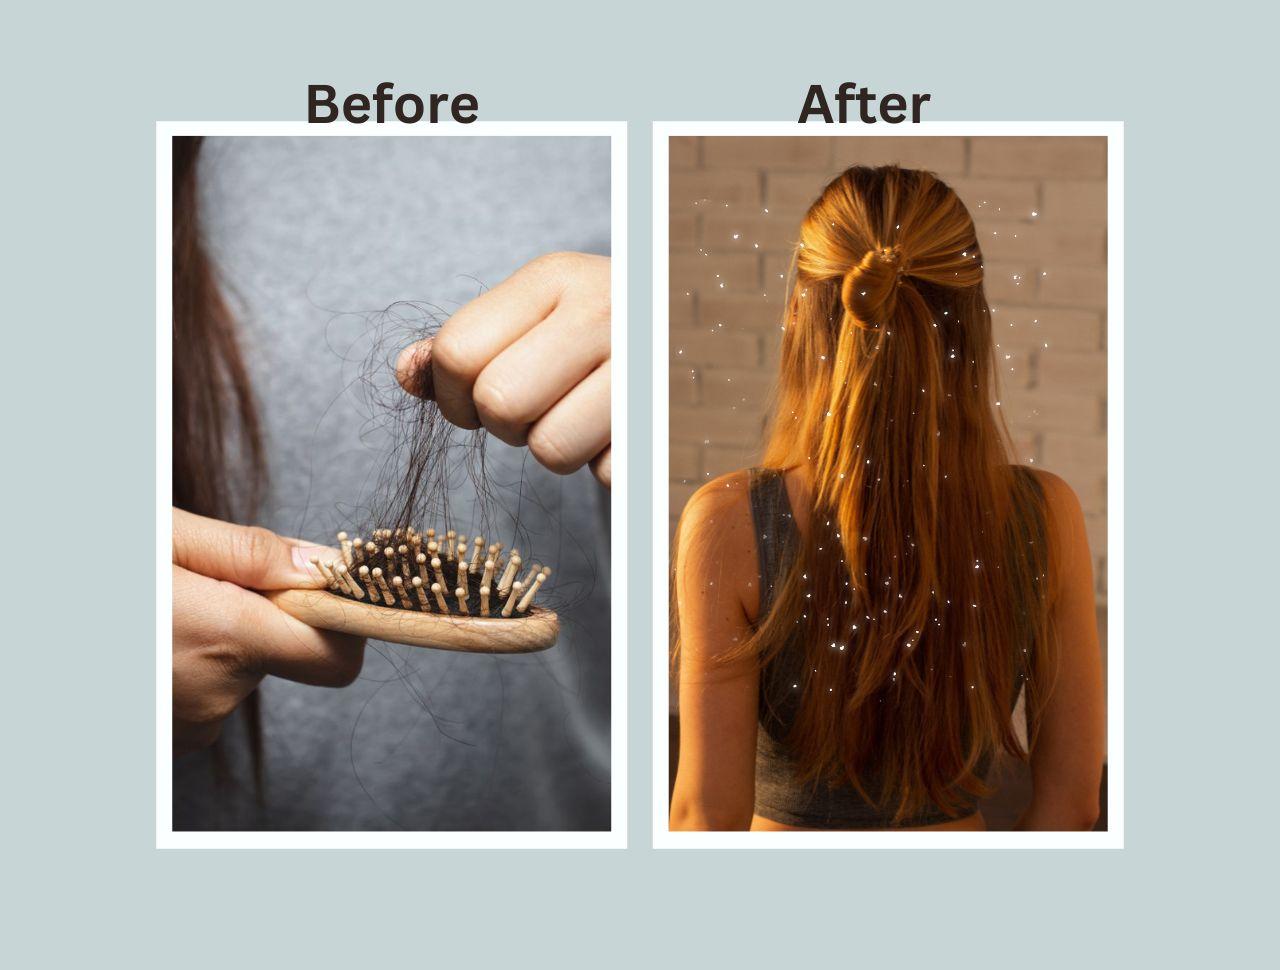 Hair Loss: How to Stop it and Regrow Hair Naturally